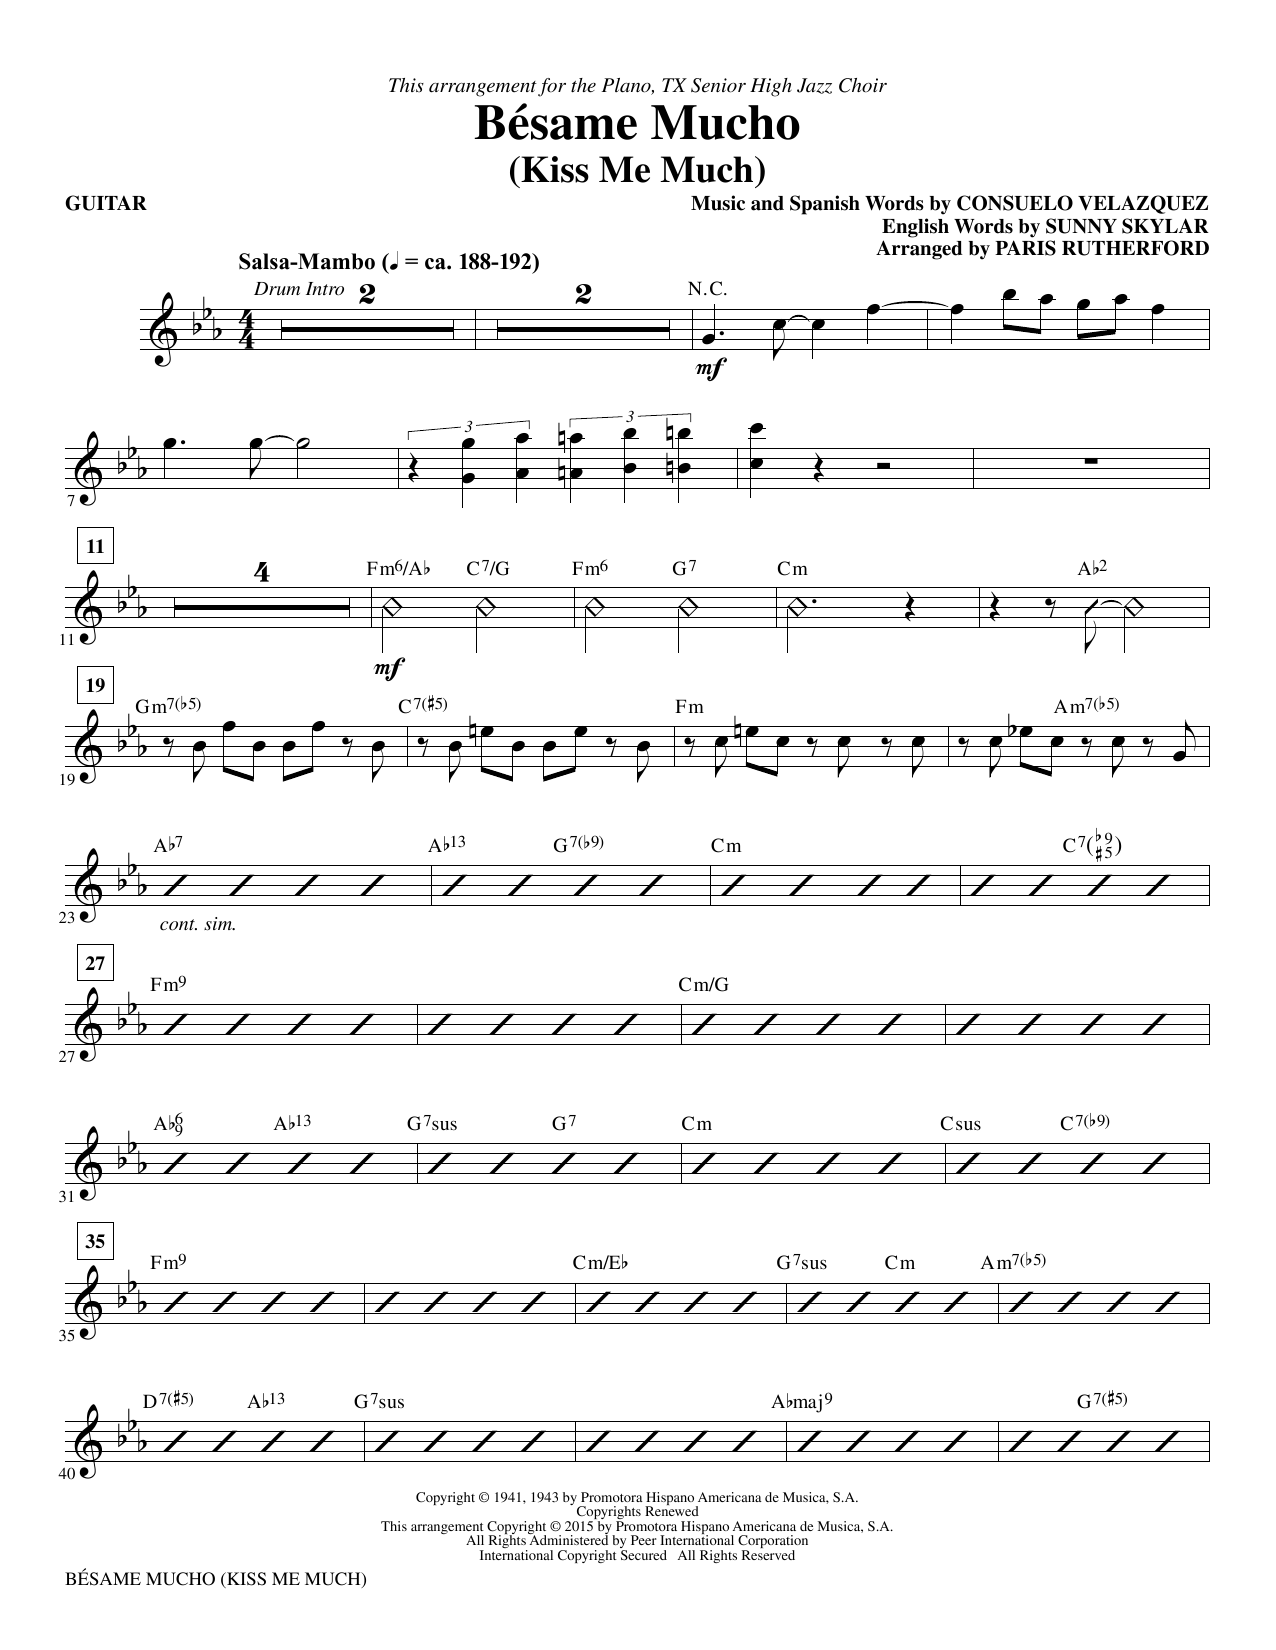 Paris Rutherford Besame Mucho (Kiss Me Much) - Guitar sheet music notes and chords. Download Printable PDF.